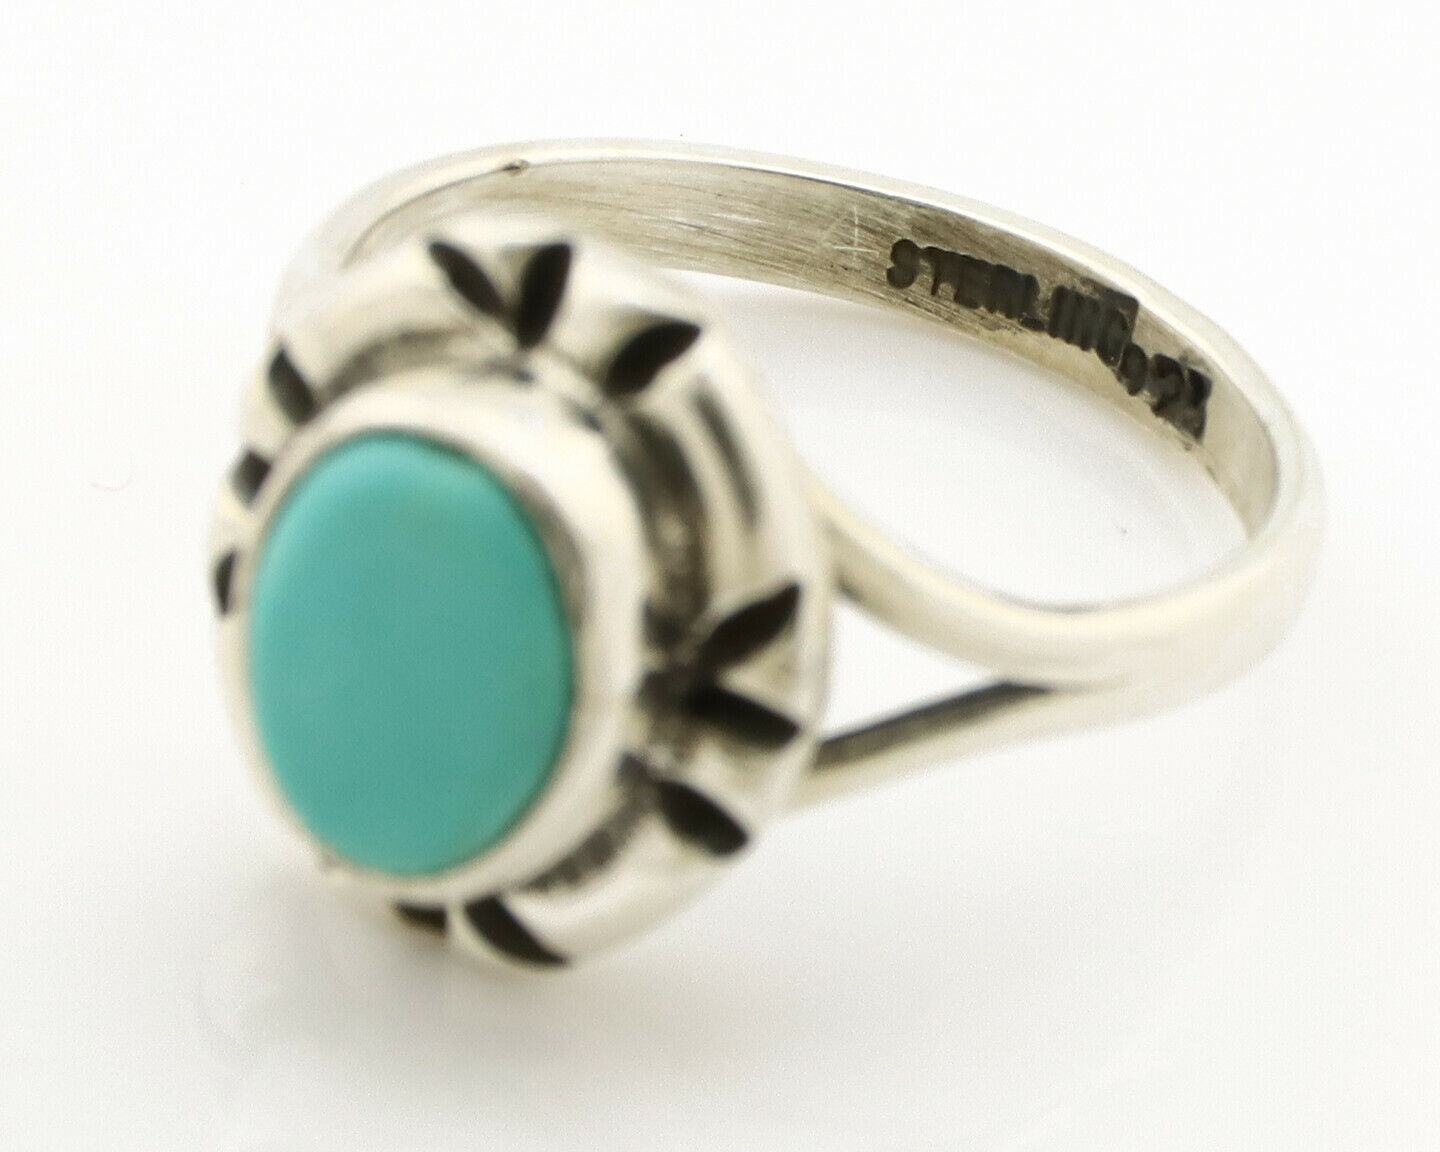 Navajo Ring .925 Silver Kingman Turquoise Artist Signed Gecko C.90's